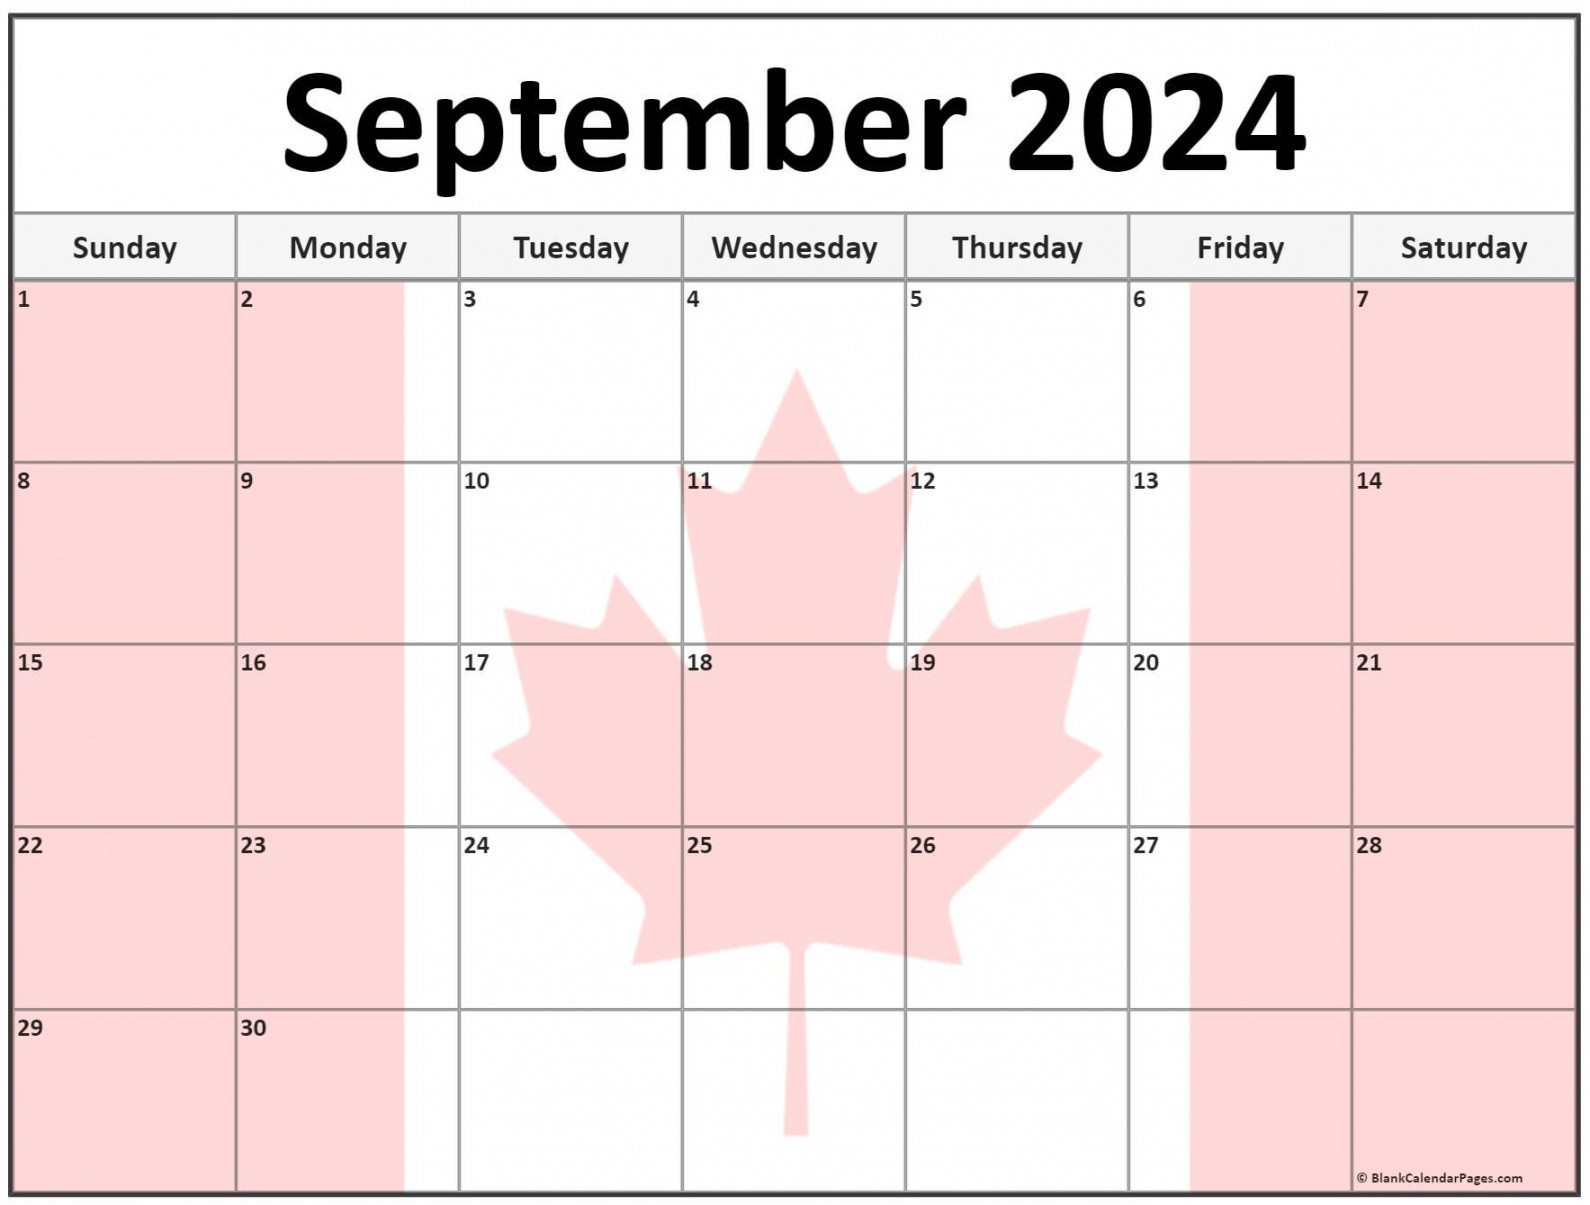 Collection of September  photo calendars with image filters.